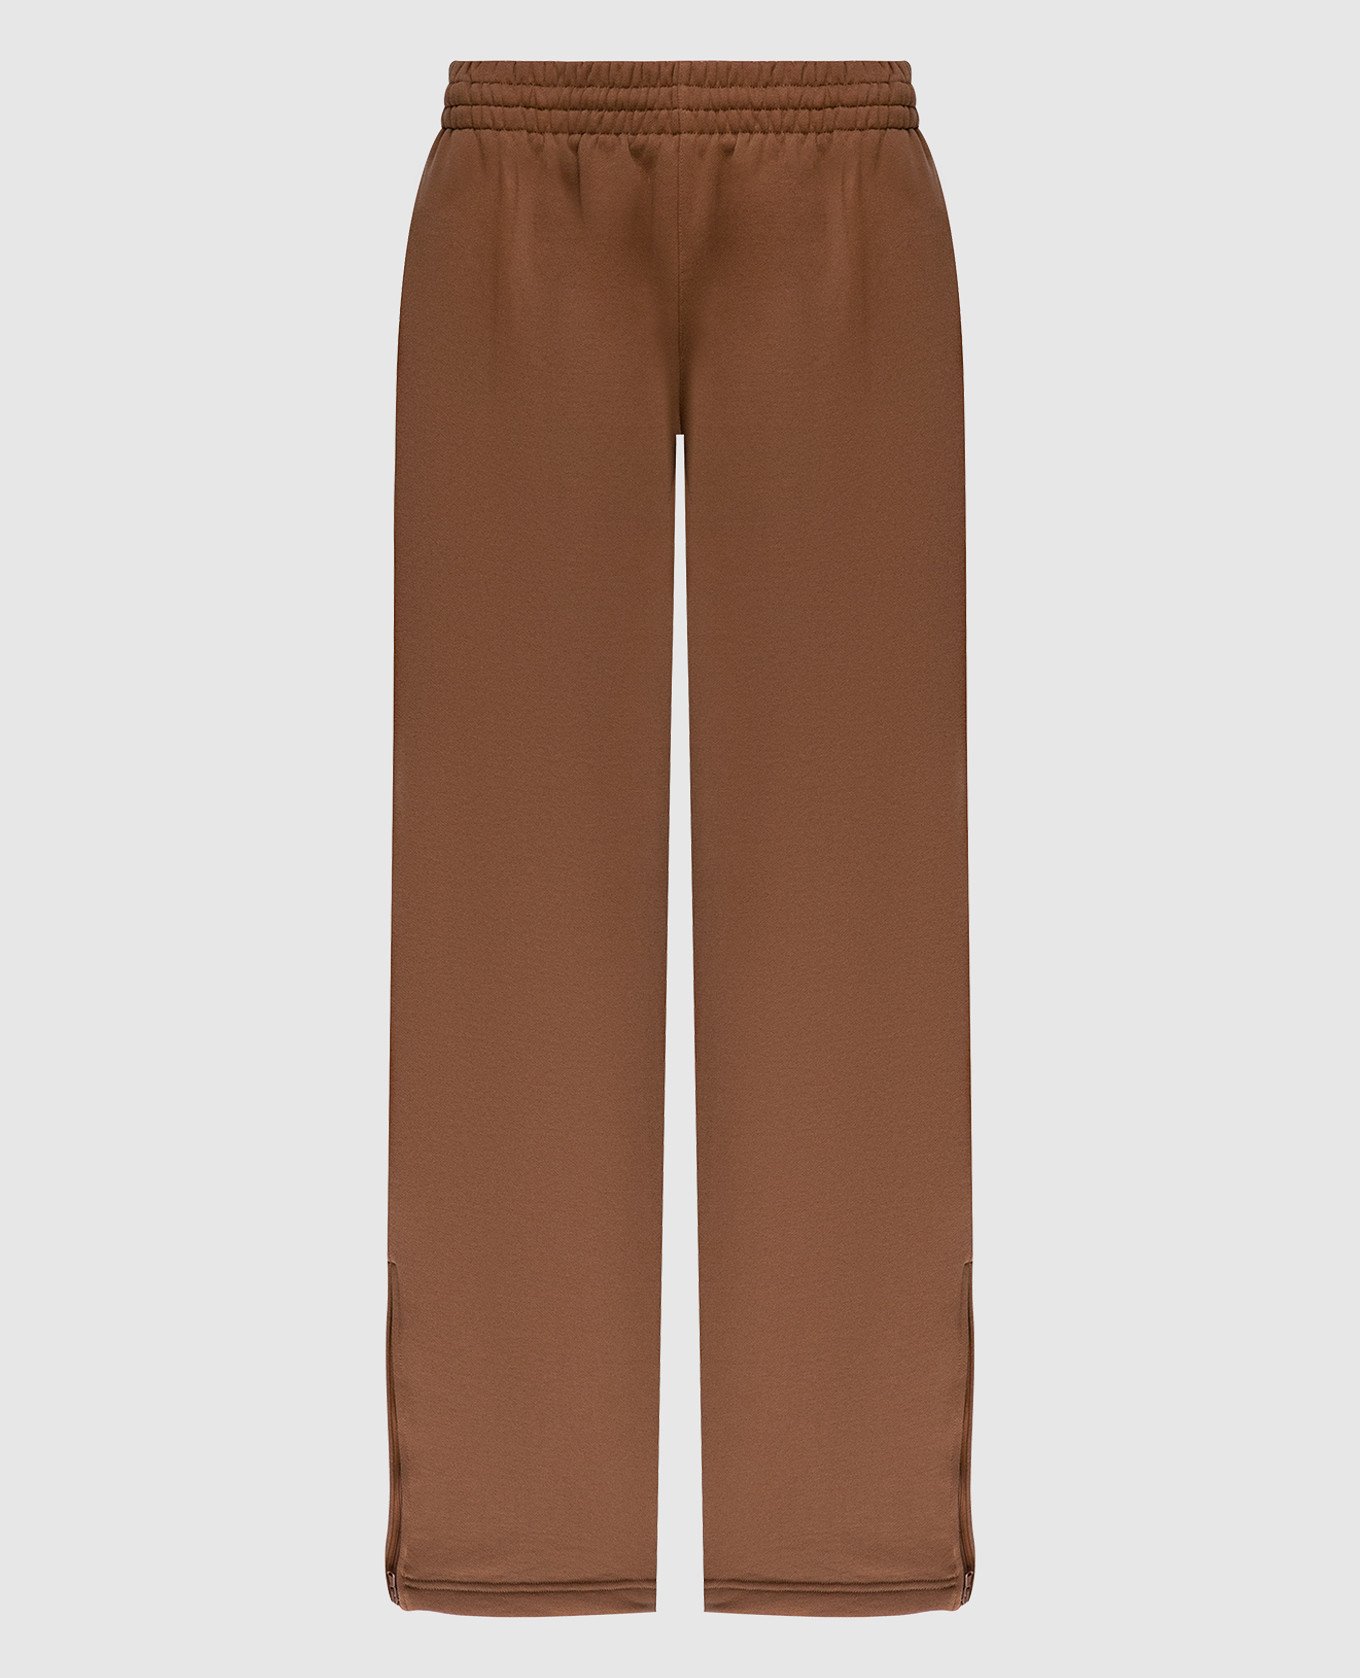 Brown sweatpants with zippers